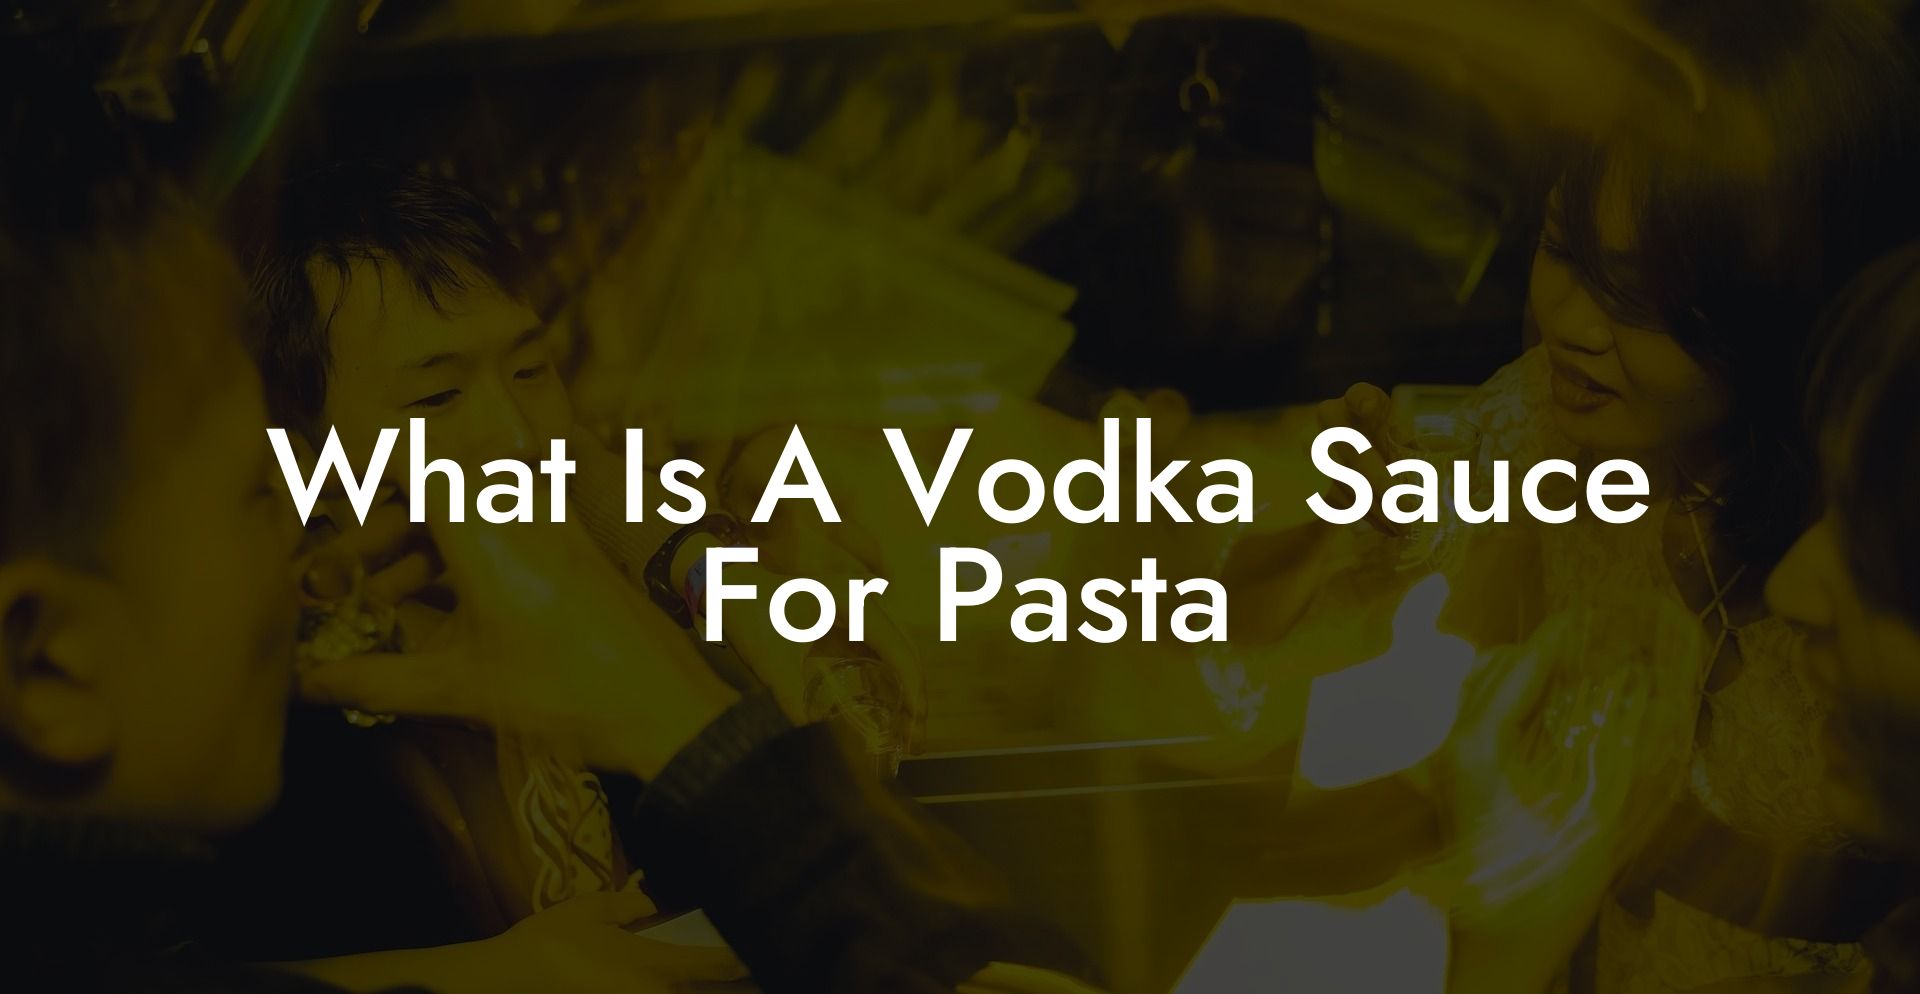 What Is A Vodka Sauce For Pasta